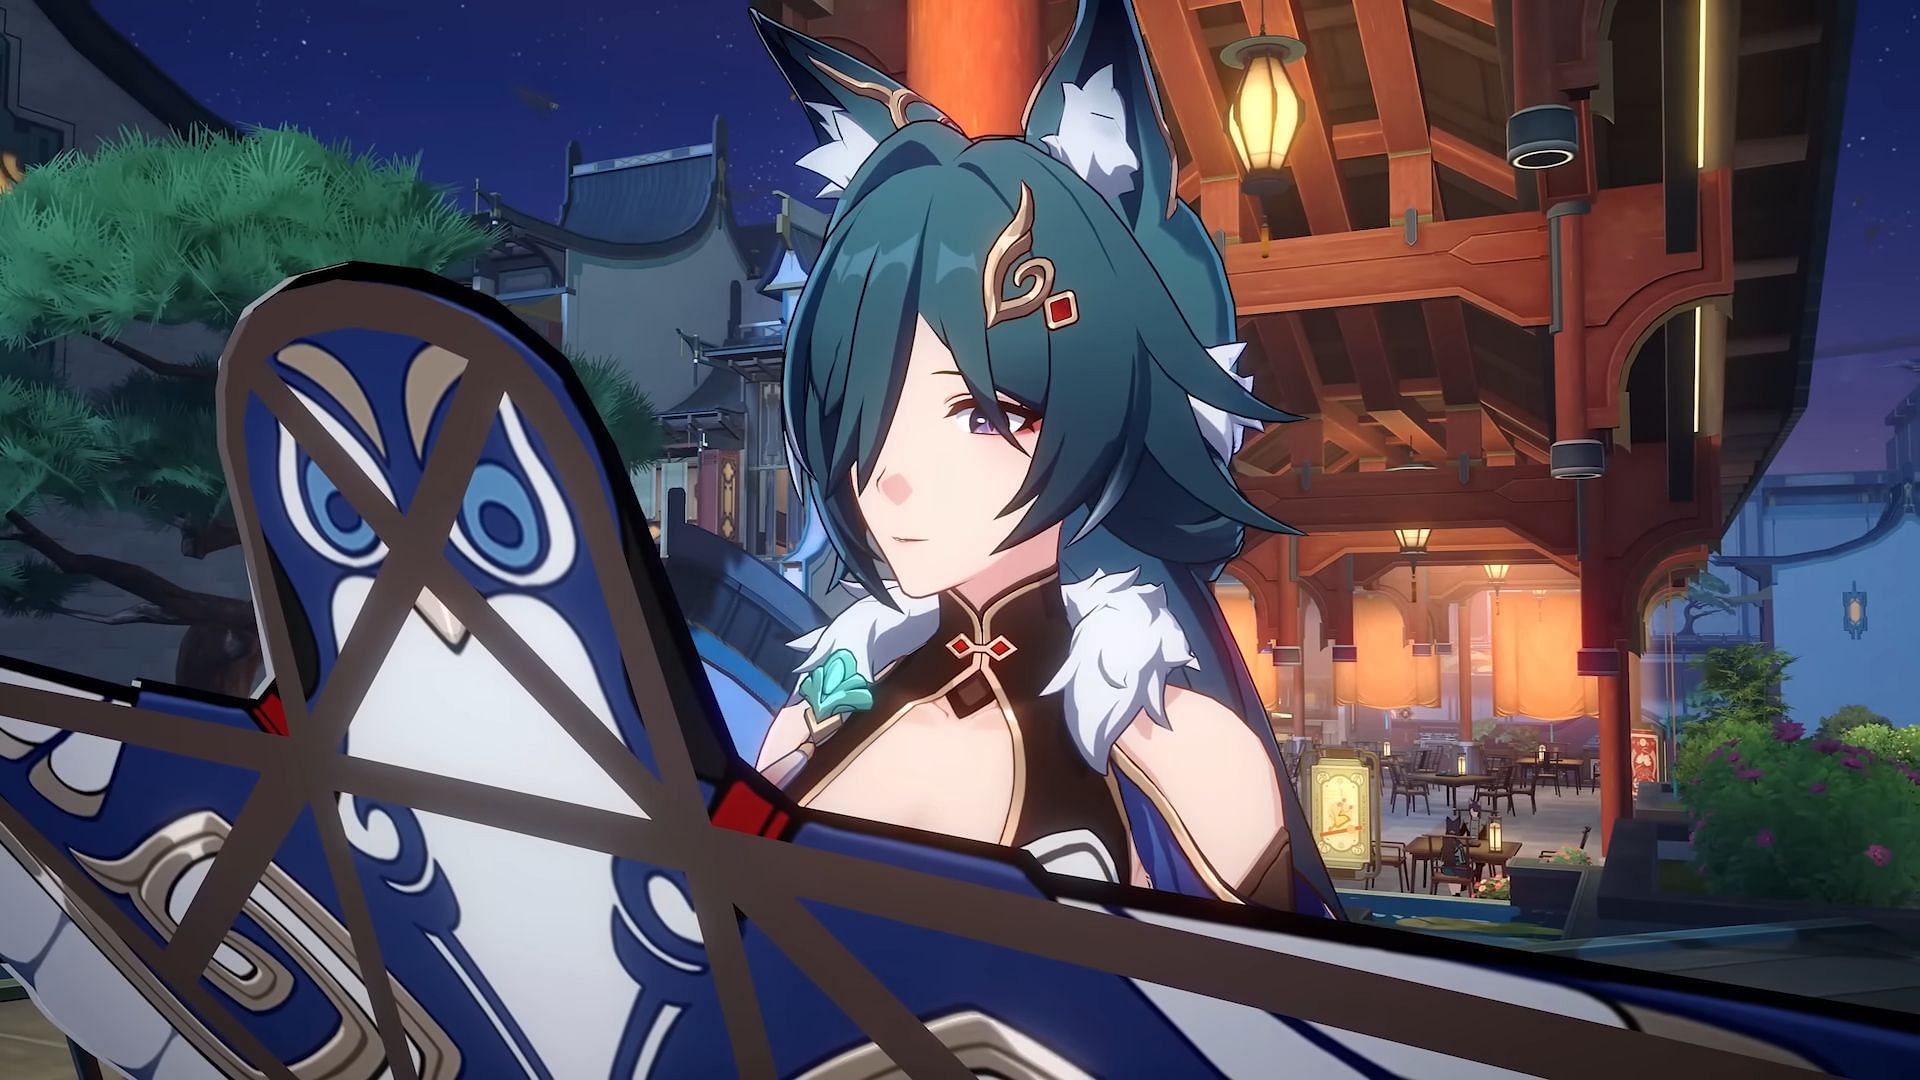 Yukong, as depicted in her character trailer